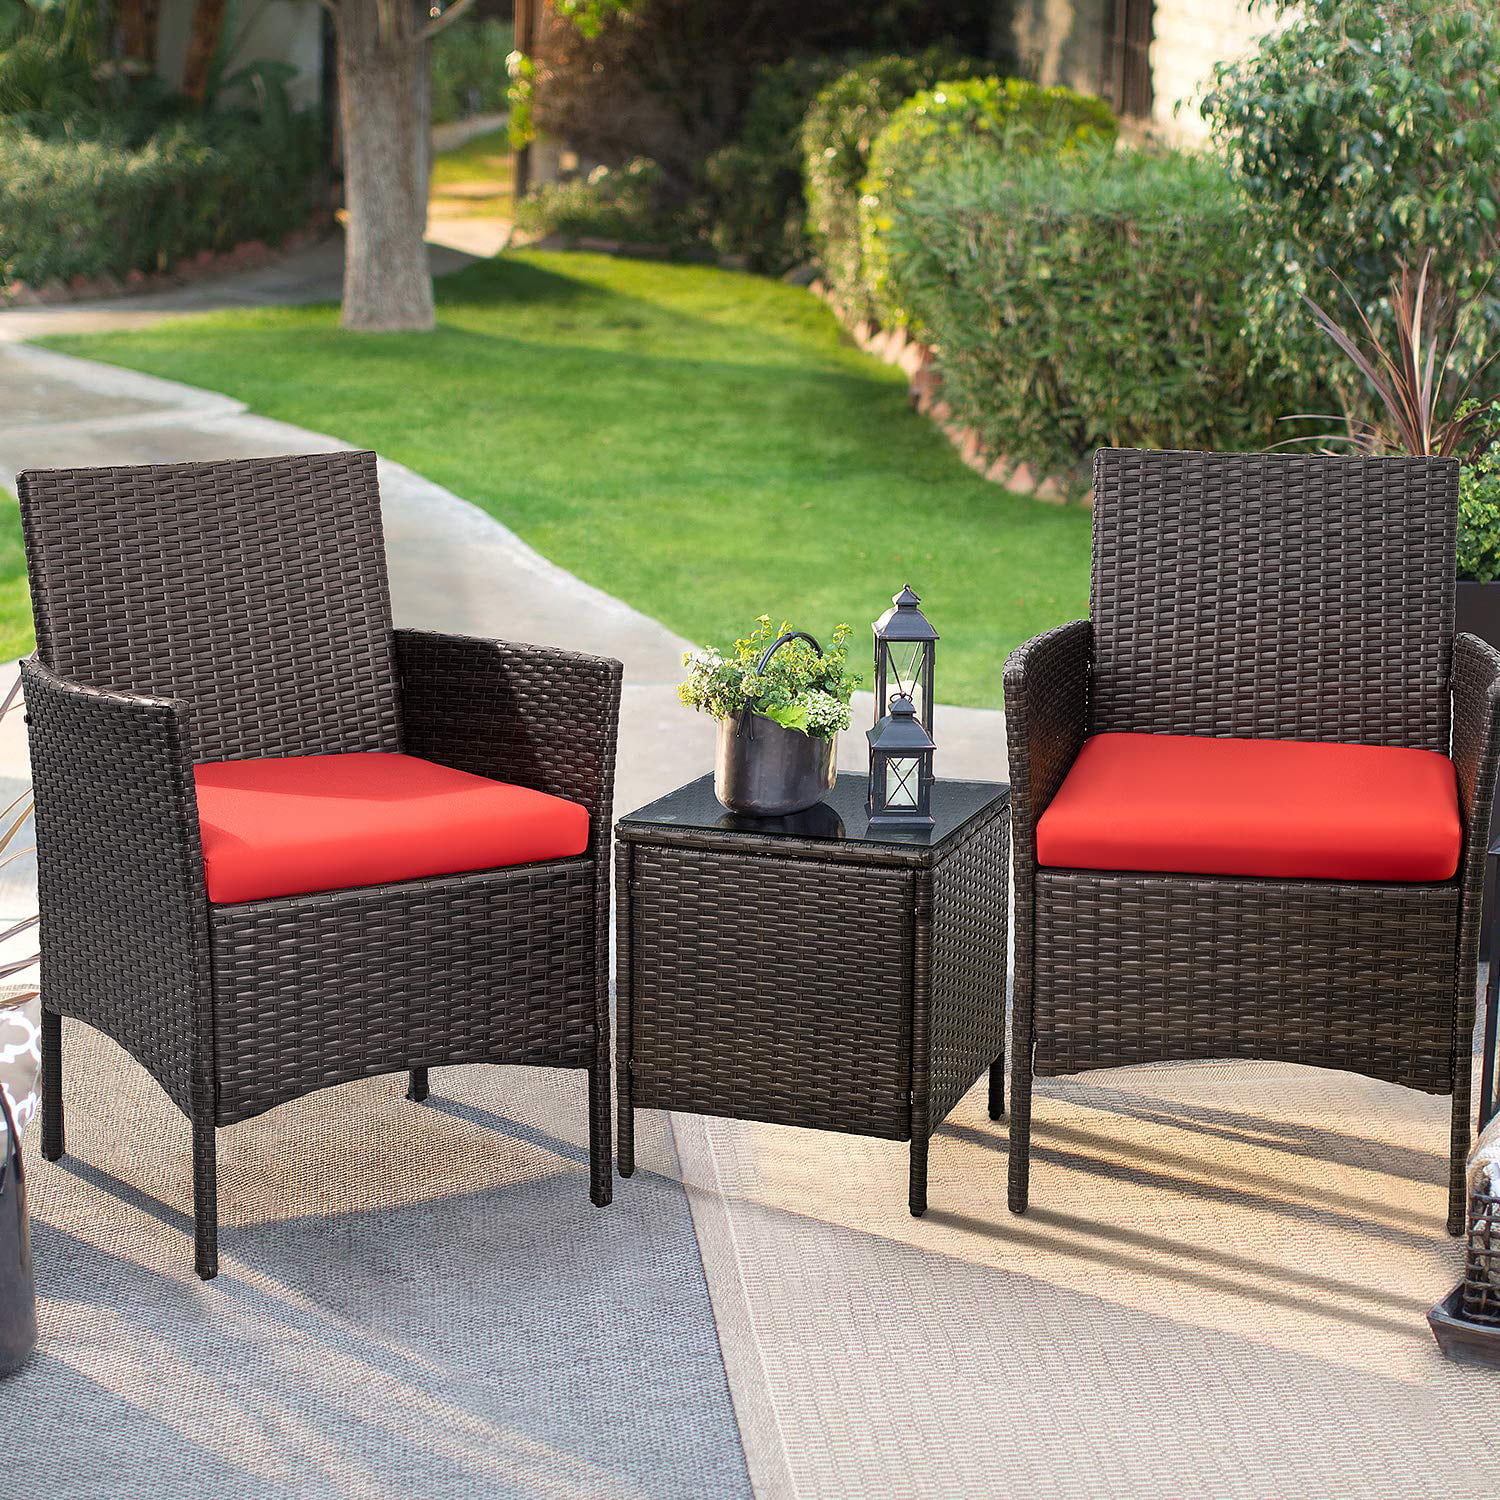 Walnew 3 PCS Outdoor Patio Furniture PE Rattan Wicker Table and Chairs